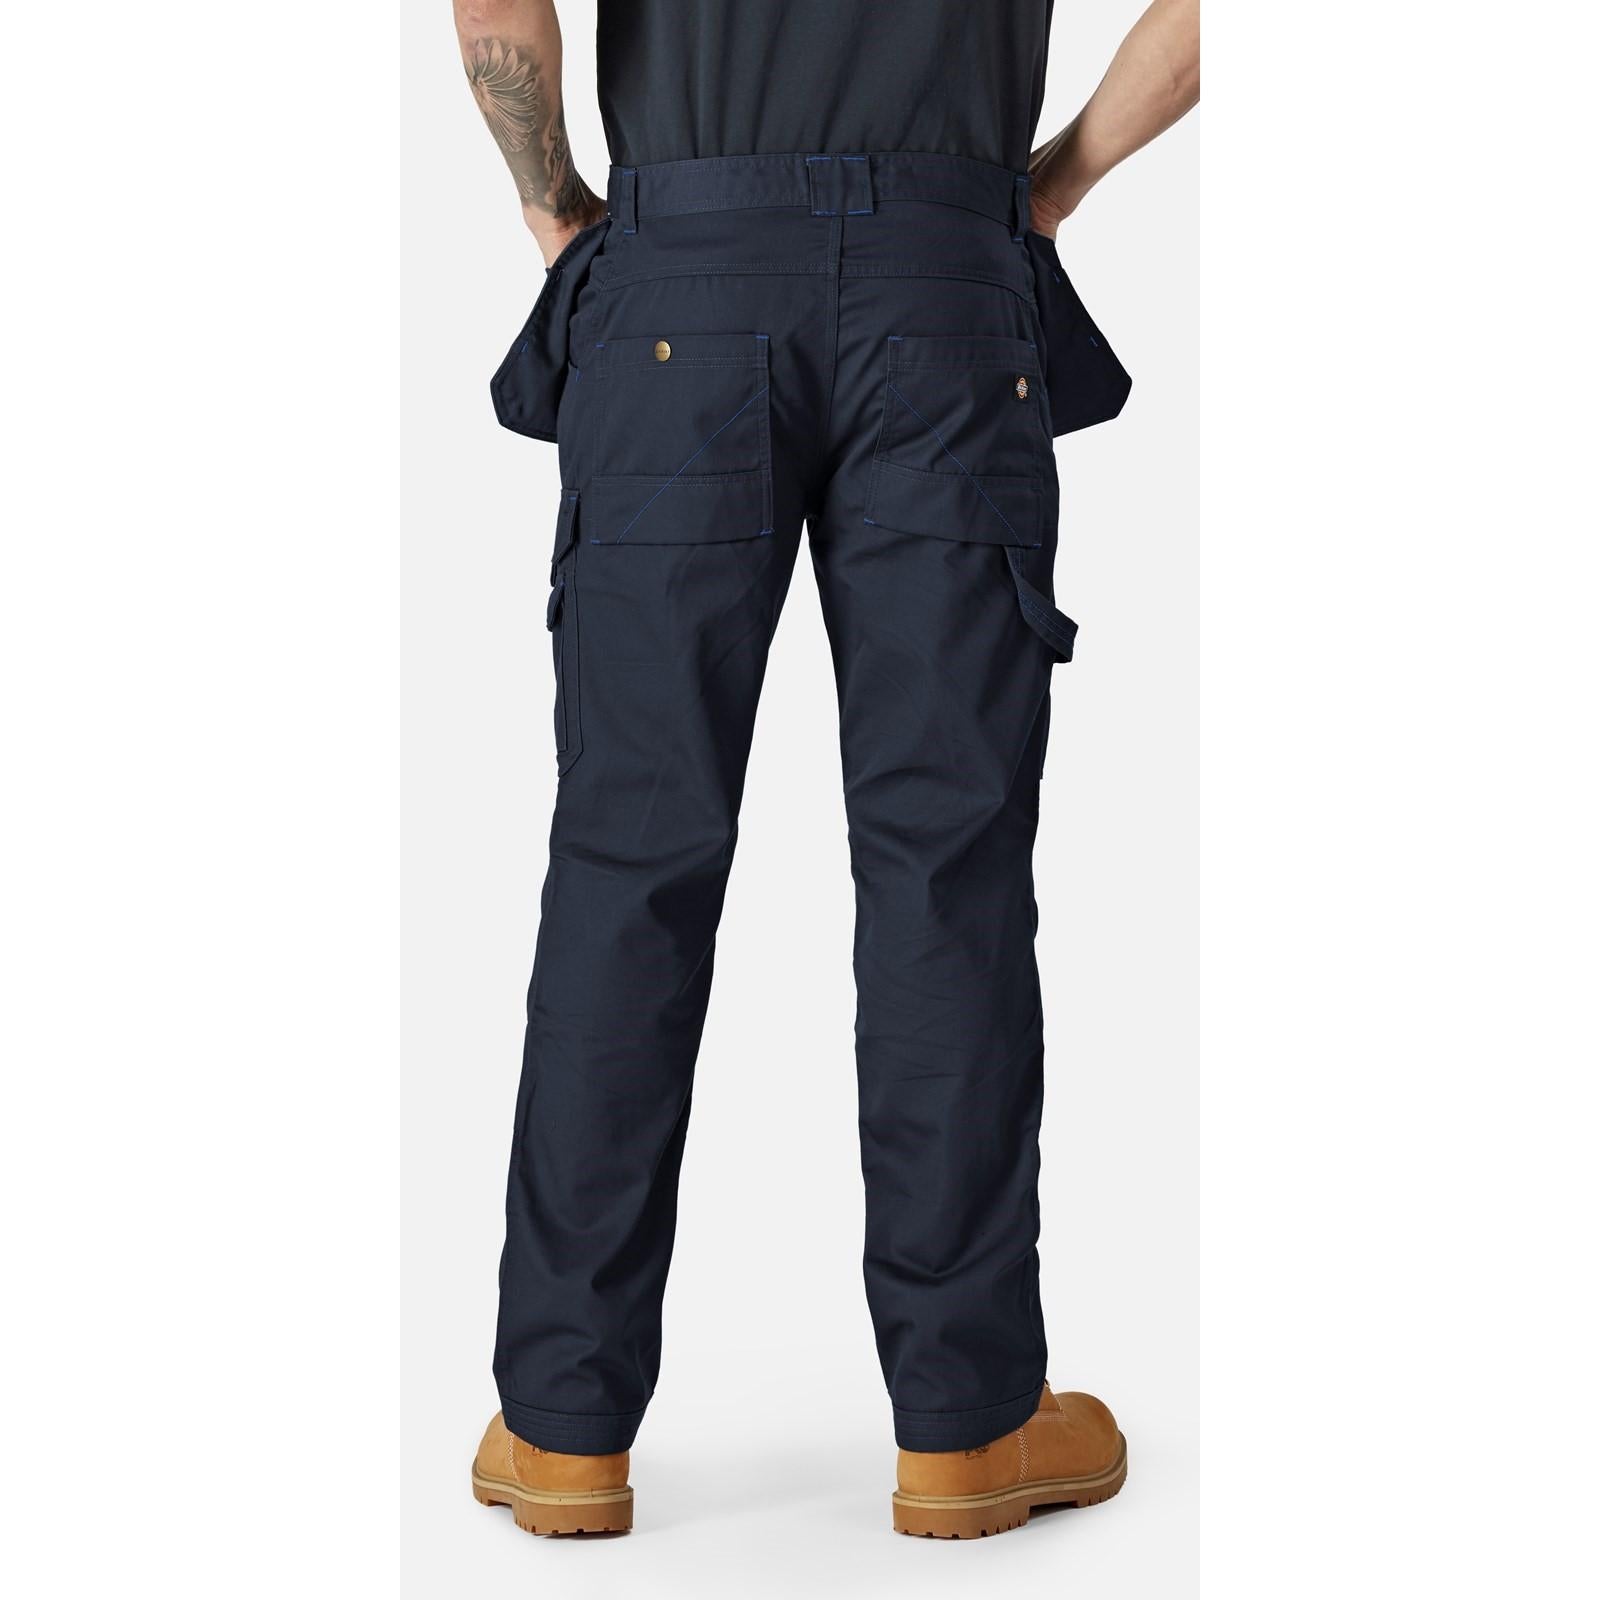 Dickies Redhawk Pro Trousers Shoes